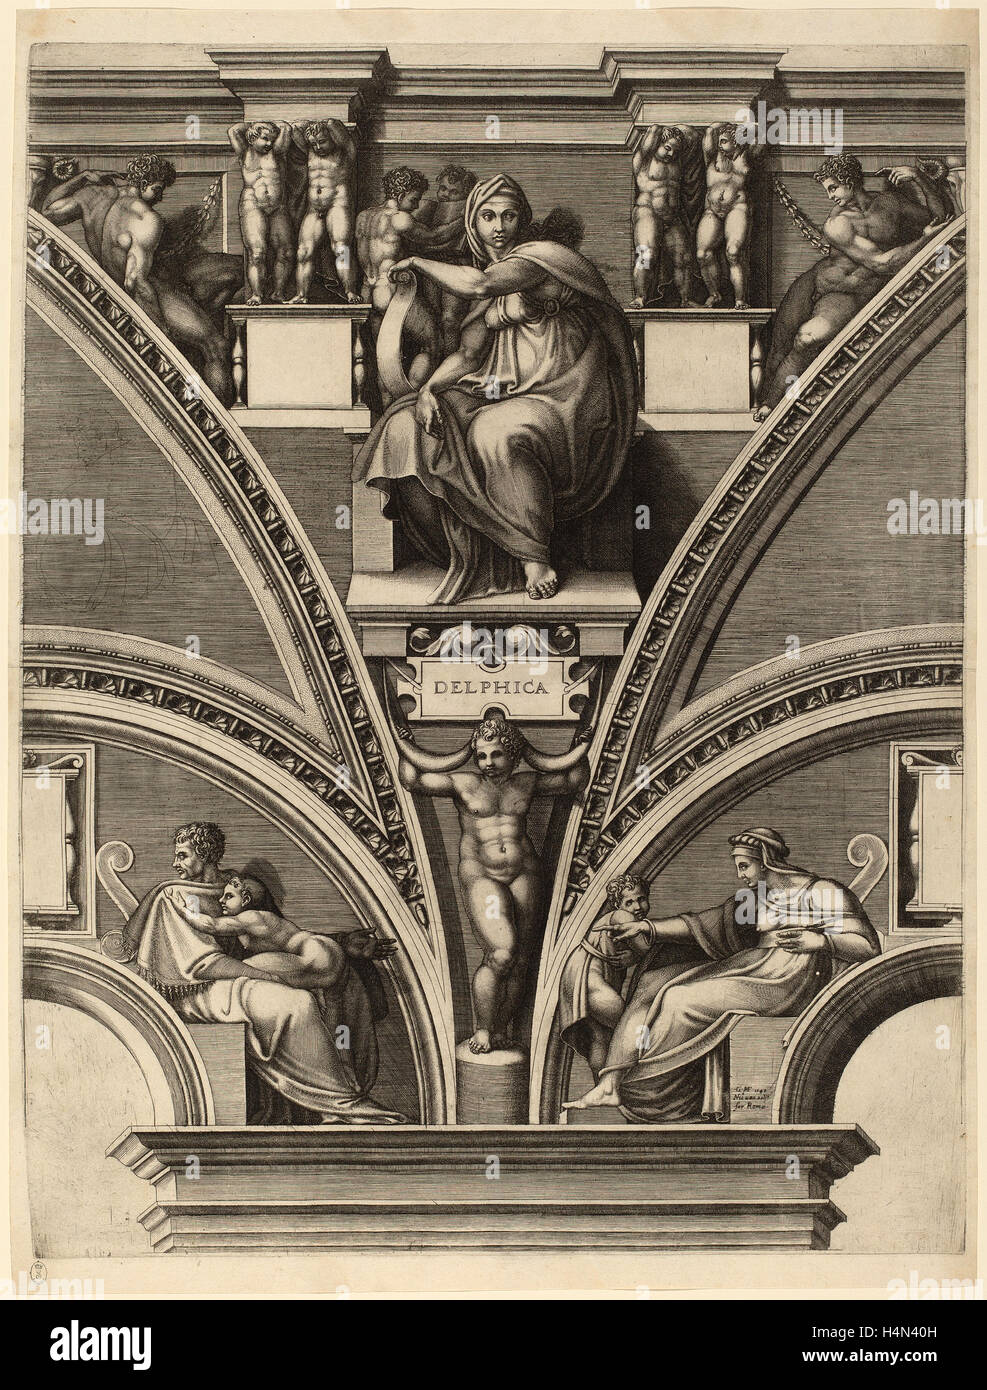 Giorgio Ghisi after Michelangelo (Italian, 1520 - 1582), The Delphic Sibyl, early 1570s, engraving on laid paper Stock Photo